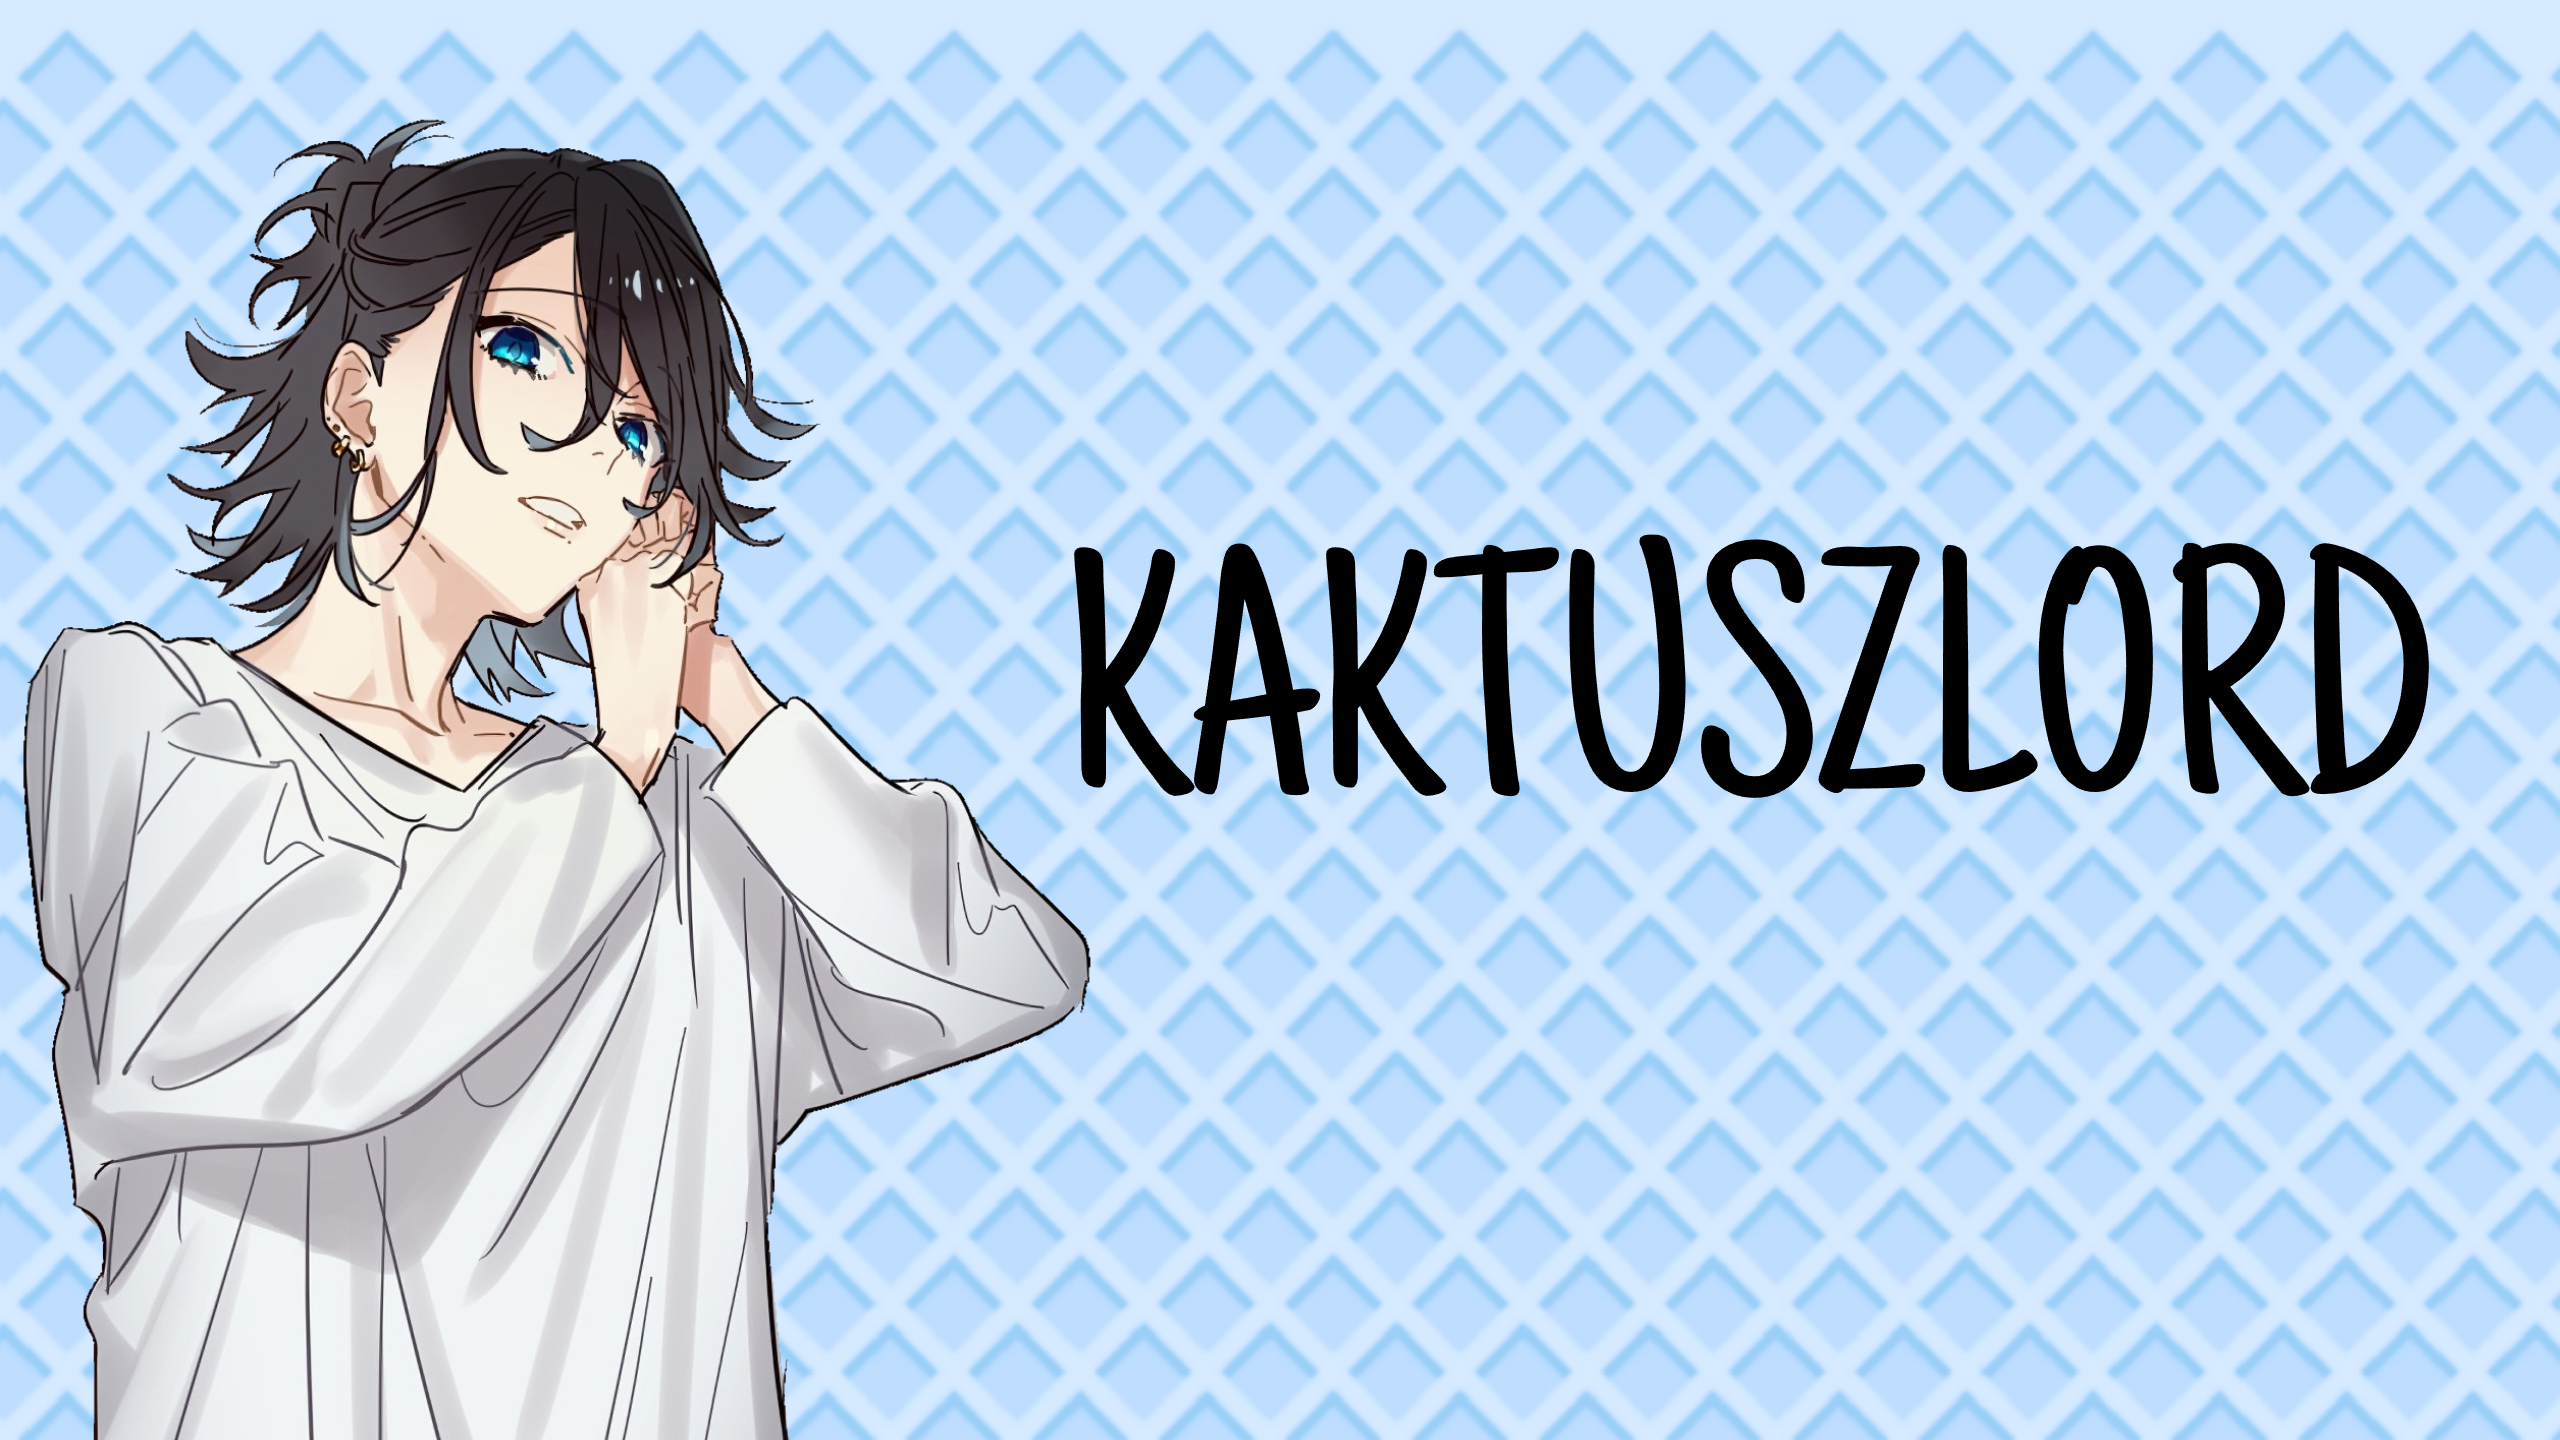 HI EVERYOOONE! ITS YOUR BOY THE ONE AND ONLY KAKTUSZLORD!